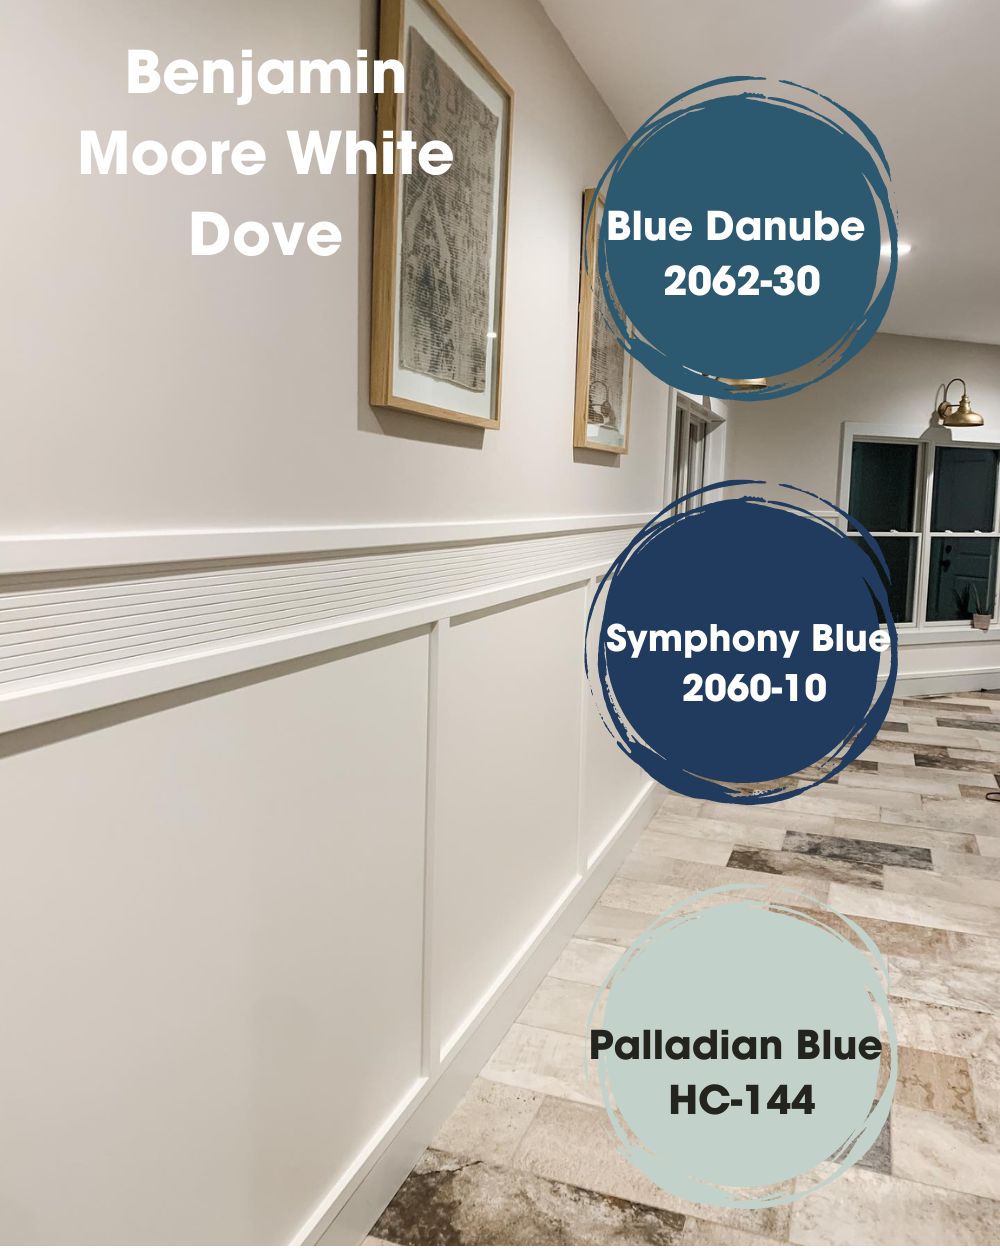 Benjamin Moore White Dove Complementary Colors